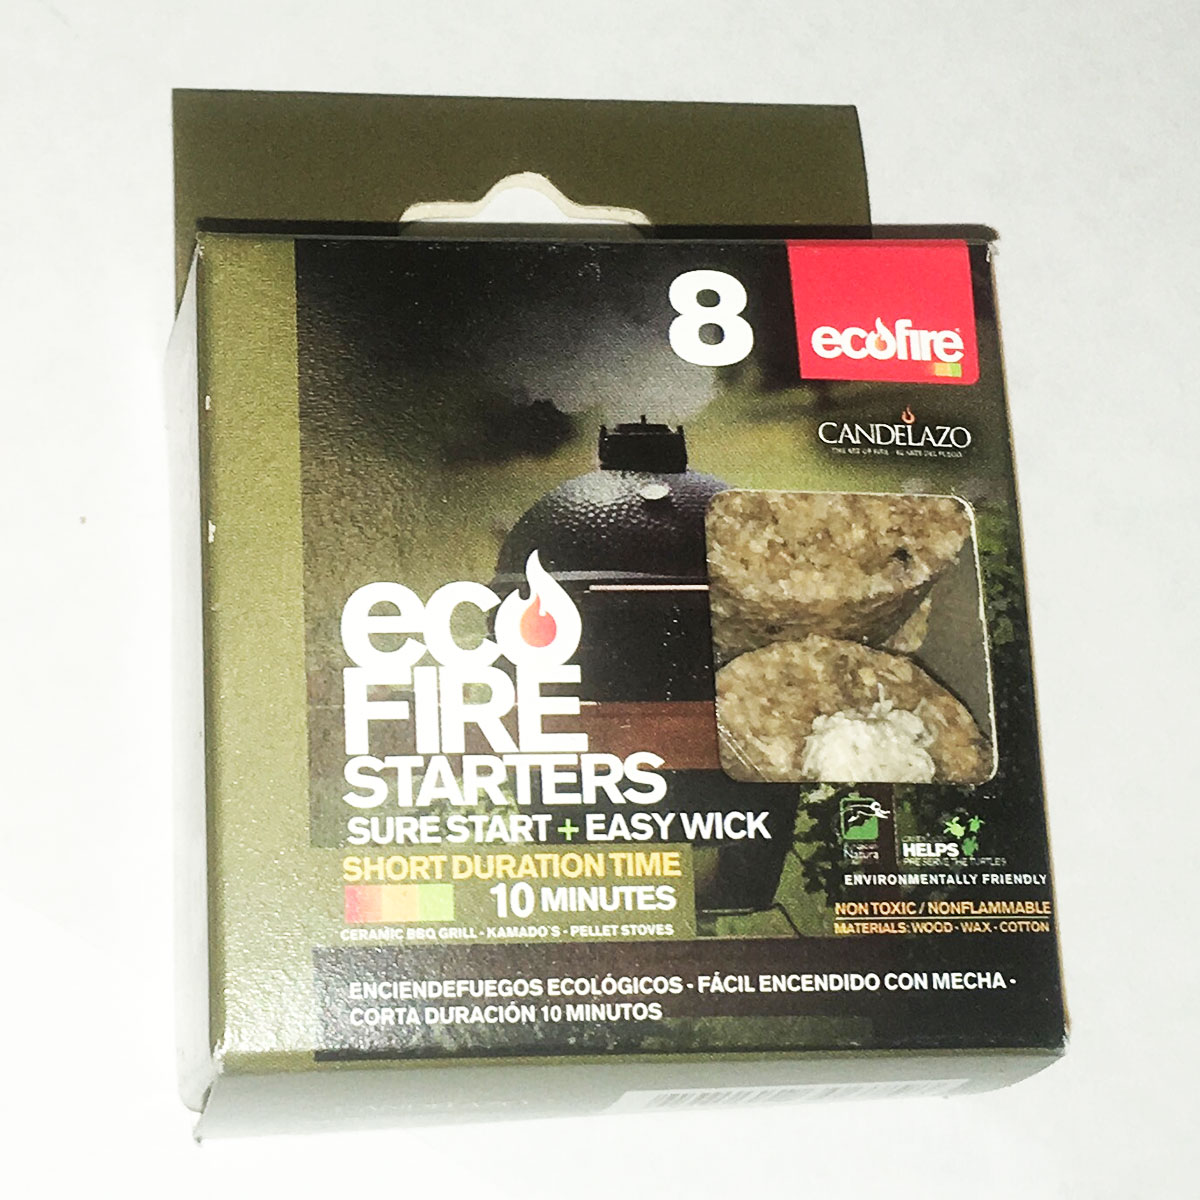 ECOFIRE Ecological Fire Starters Long Duration Time x 48 units.